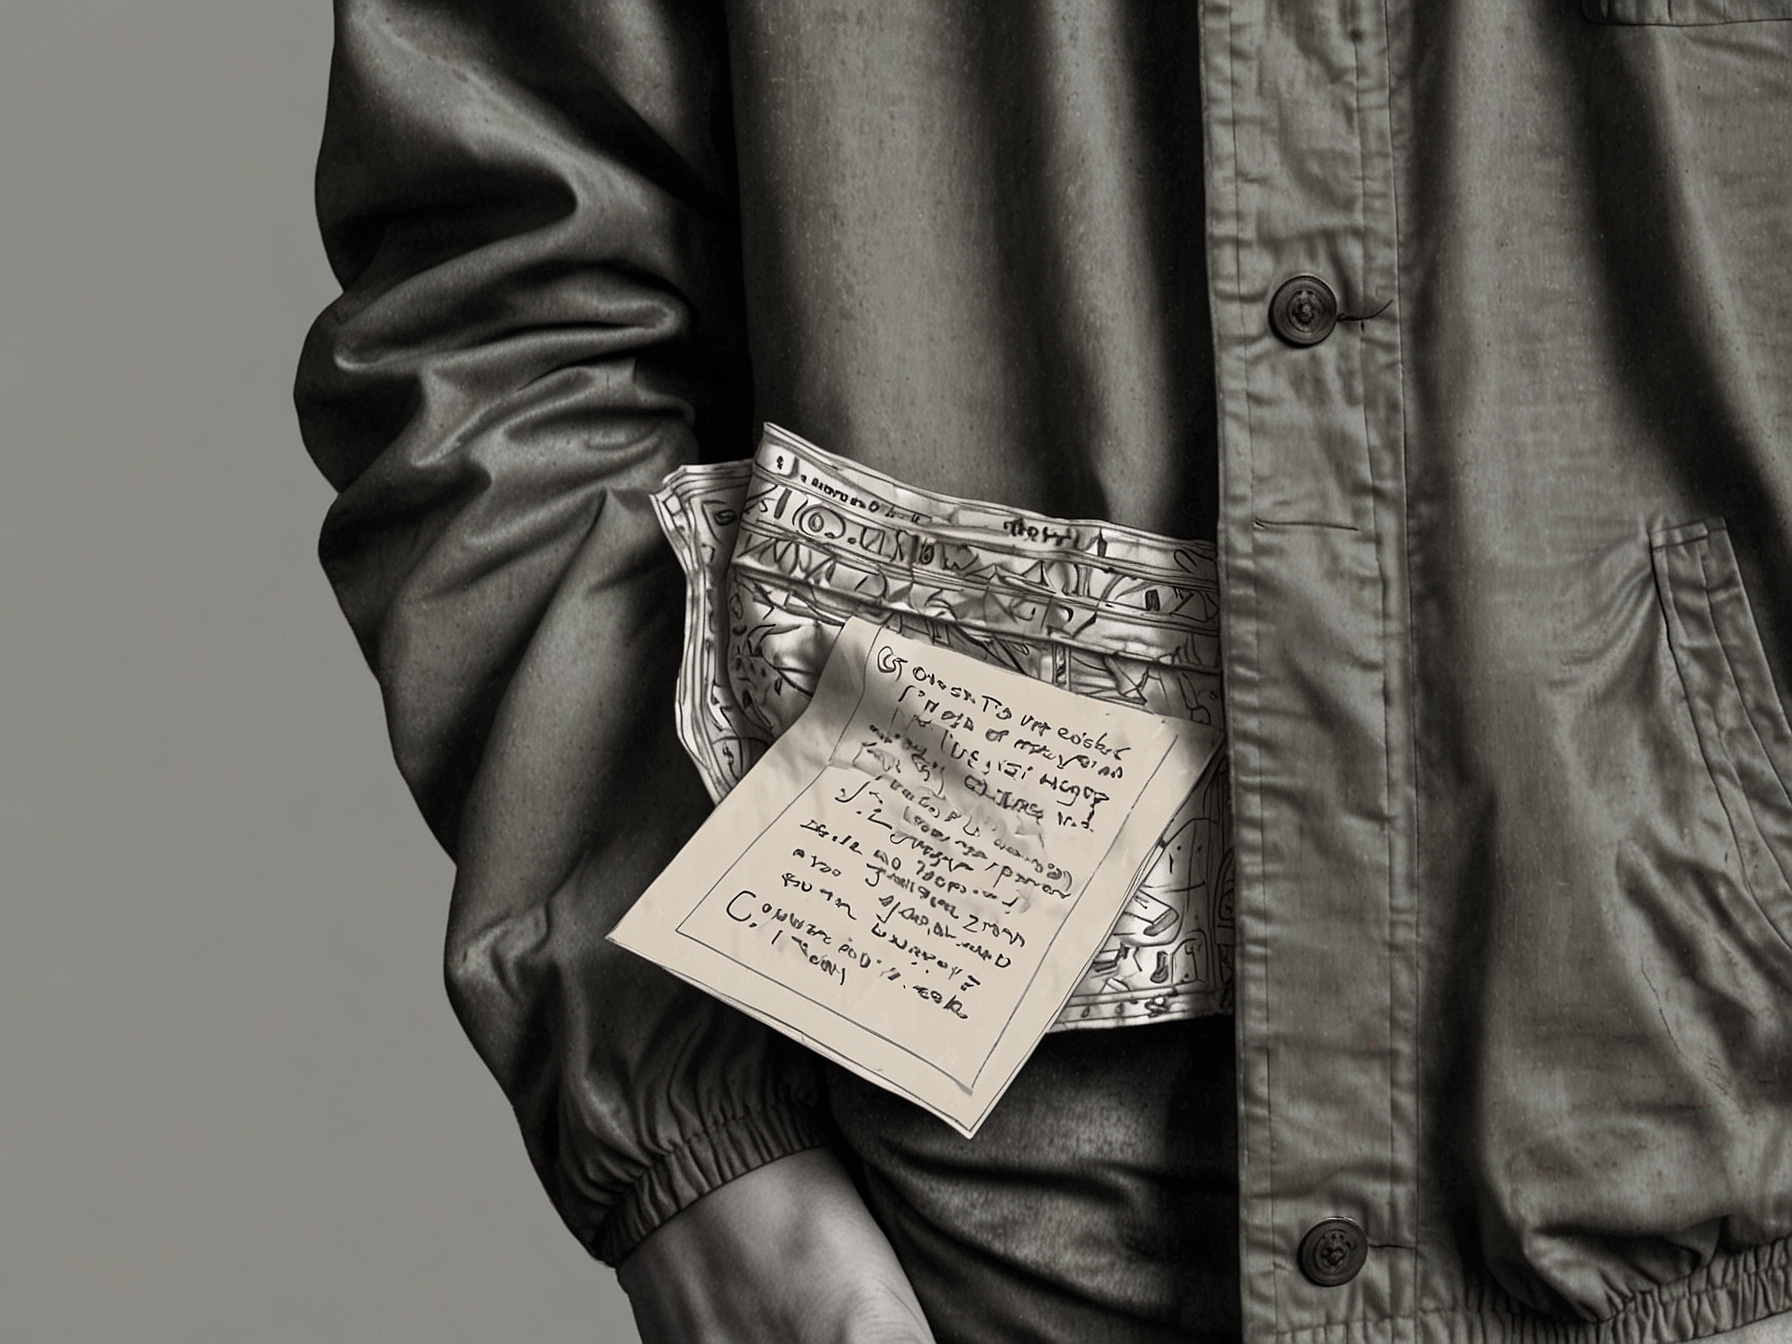 Close-up of a jacket pocket revealing a crumpled note with aggressive language and small knick-knacks, illustrating the upsetting discovery during an online second-hand purchase.